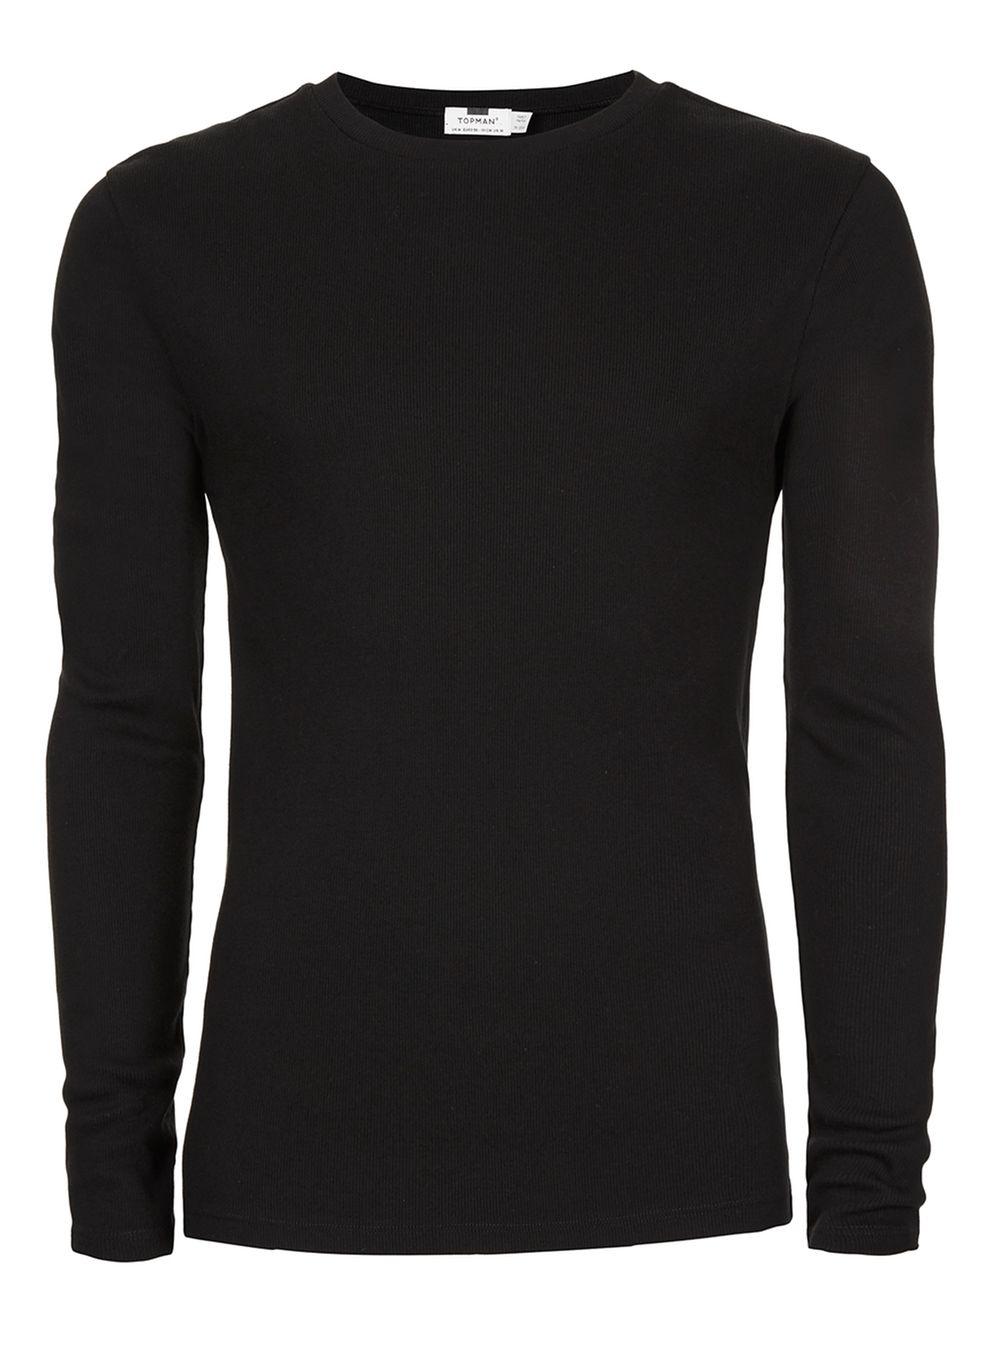 TOPMAN Cotton Black Ribbed Muscle Fit Long Sleeve T-shirt for Men - Lyst